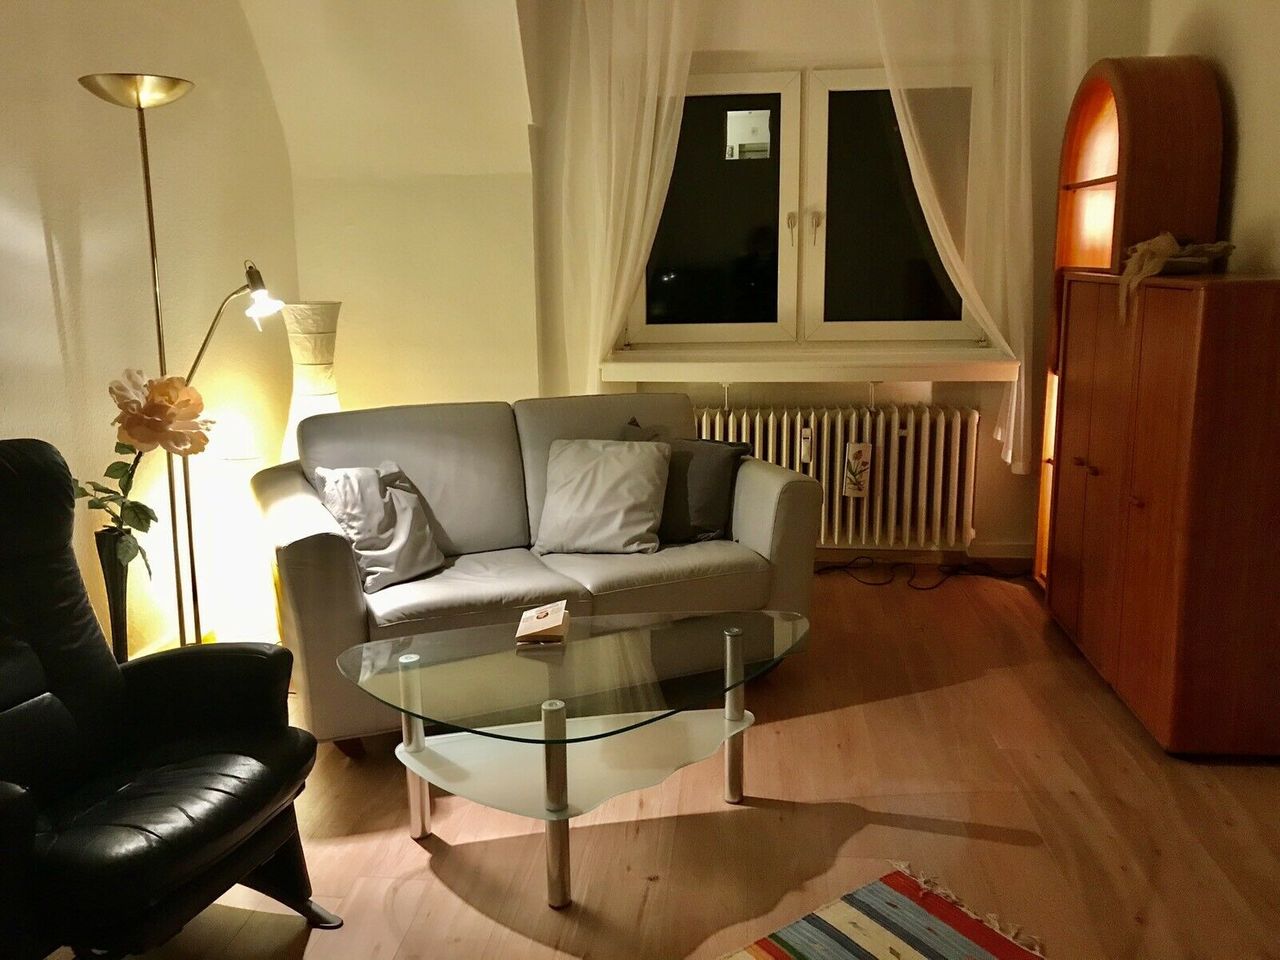 Quietly situated, comfortable apartment in the trendy district of Flingern